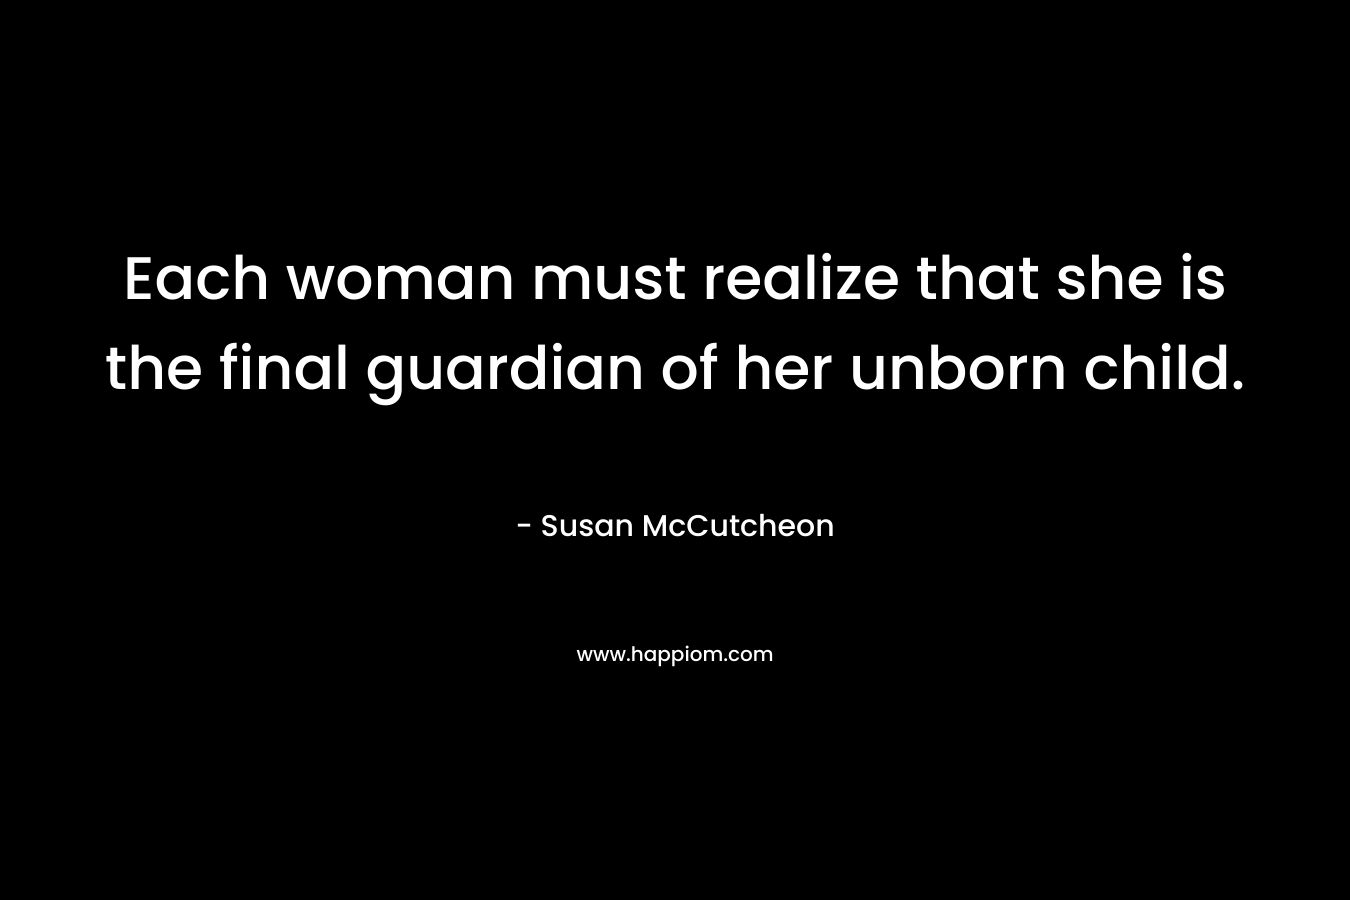 Each woman must realize that she is the final guardian of her unborn child.